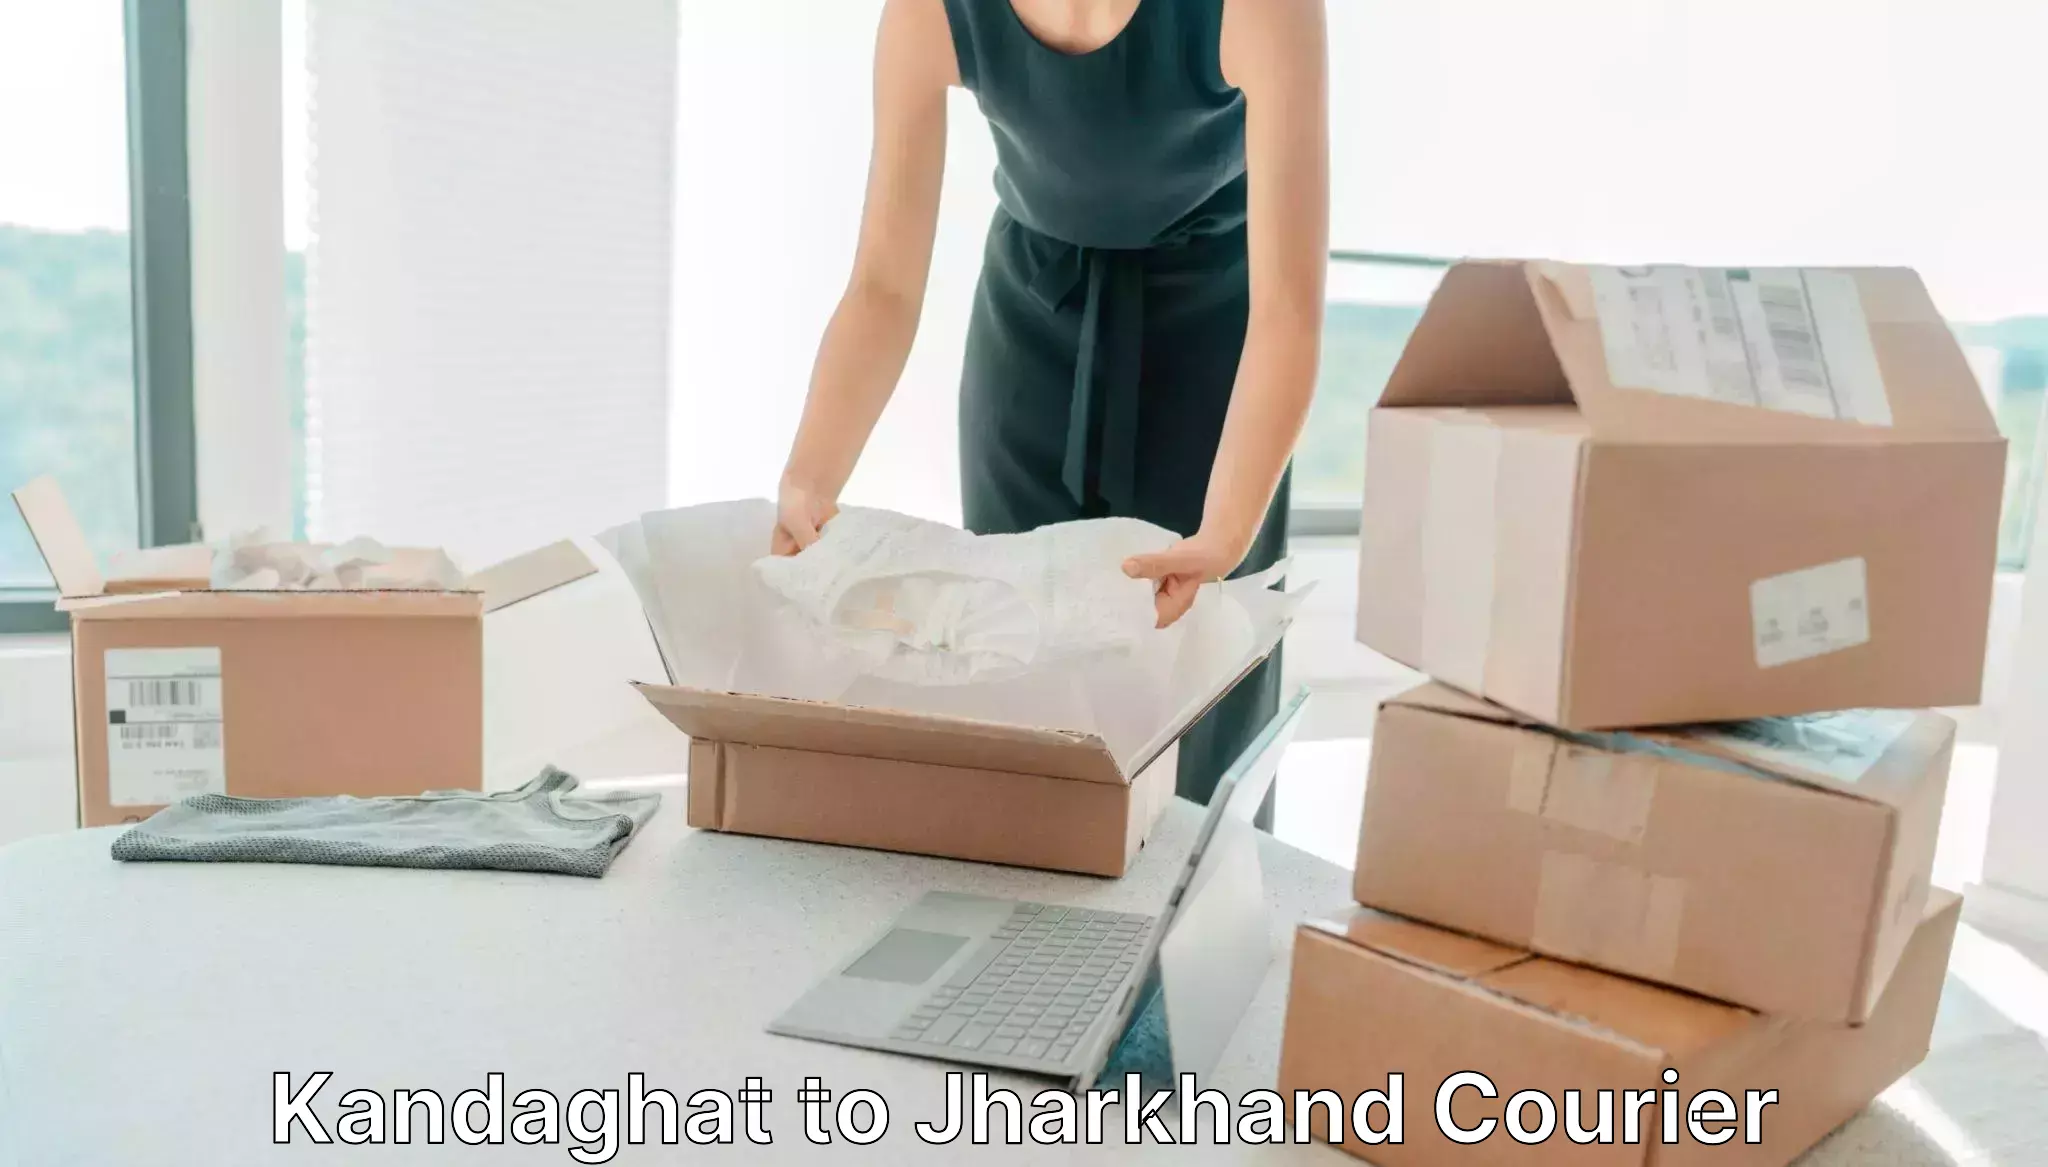 Full-service courier options Kandaghat to Isri